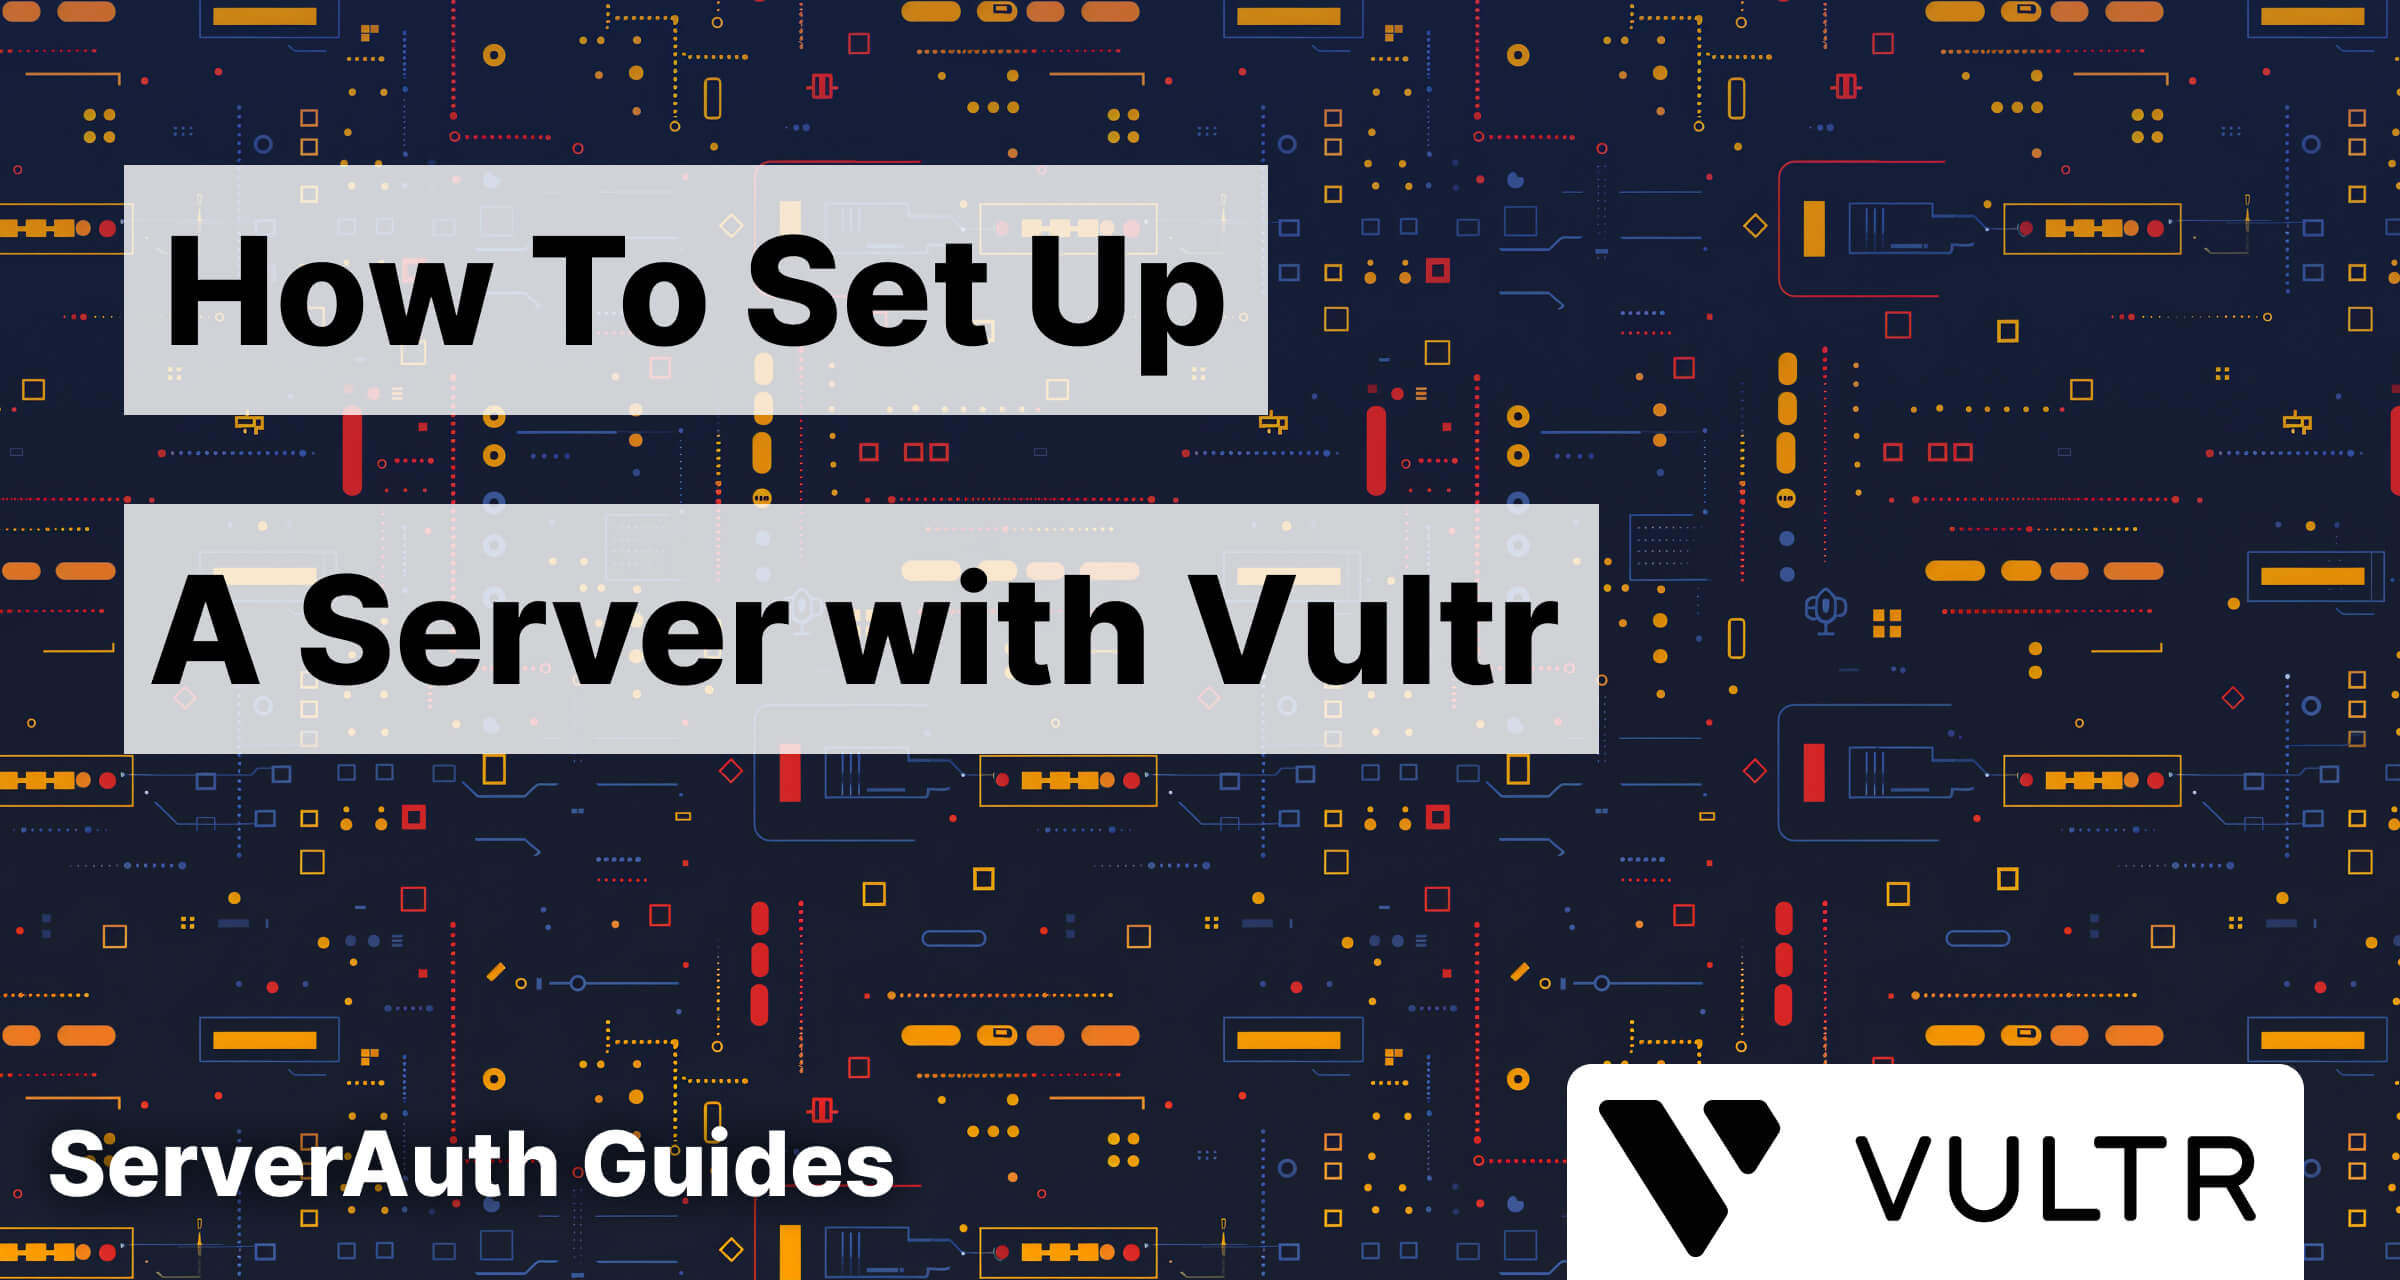 How to set up a server with Vultr